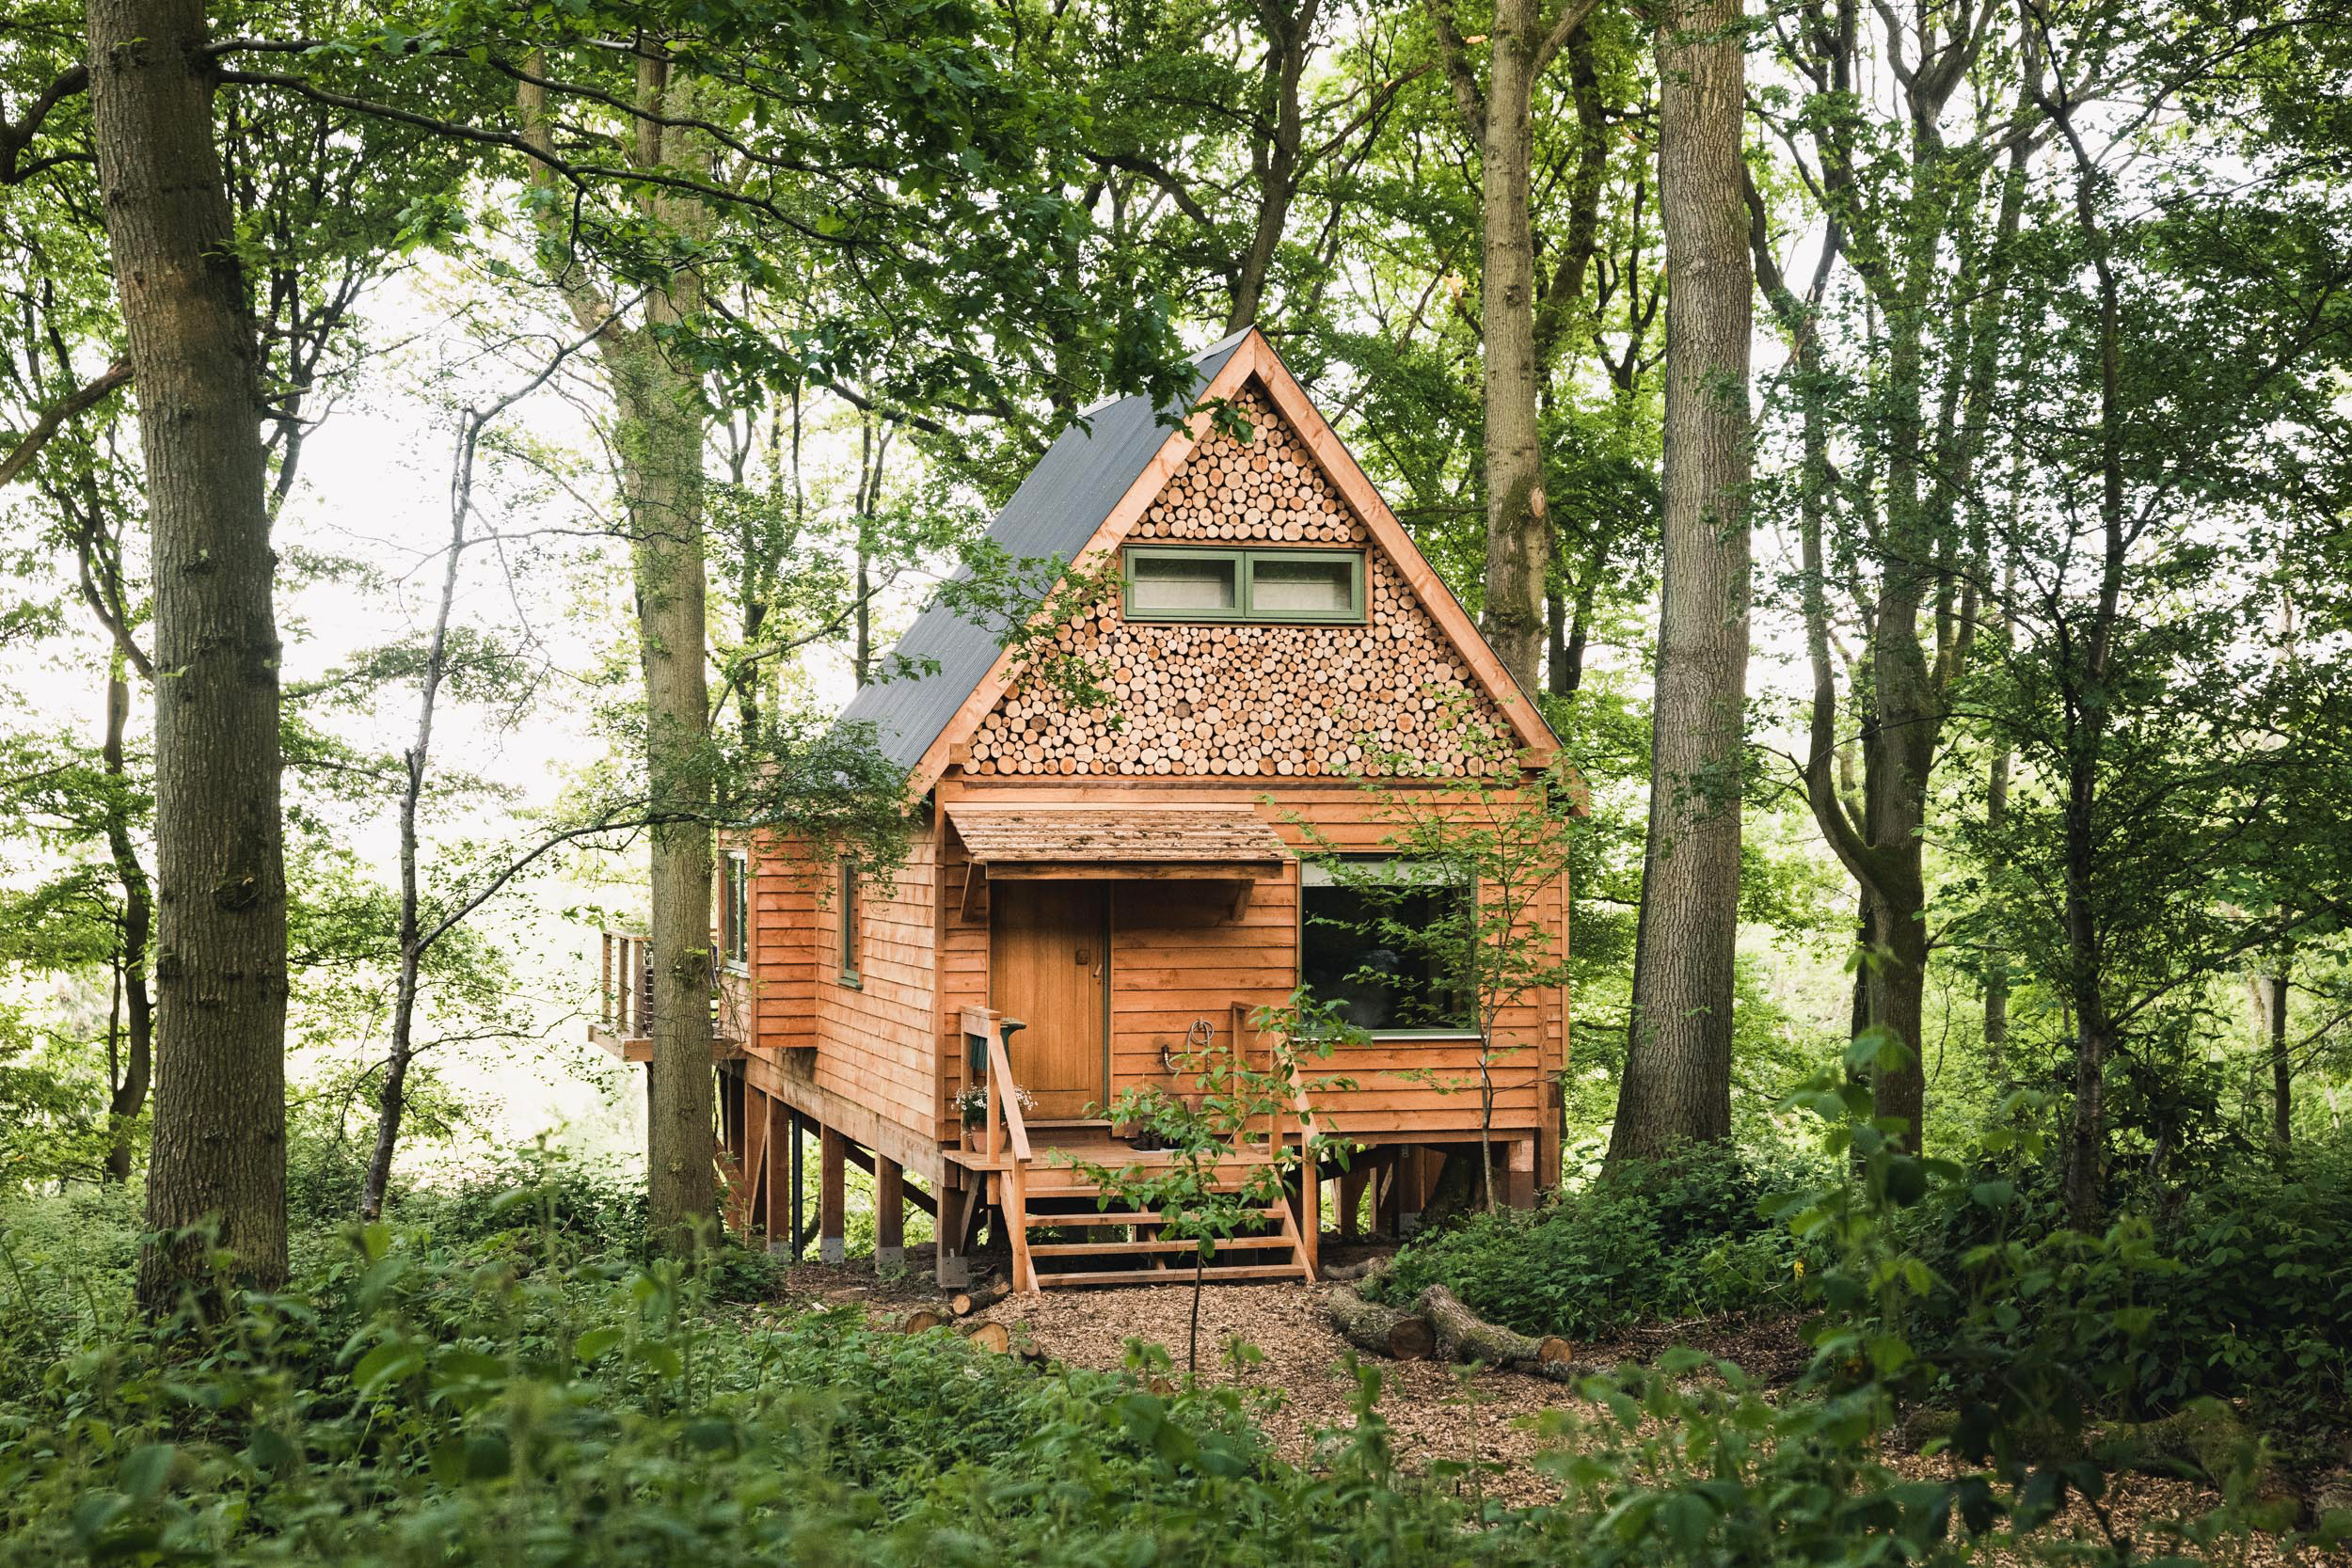 the treehouse—a house amid trees—is located on the bald spot of a 14